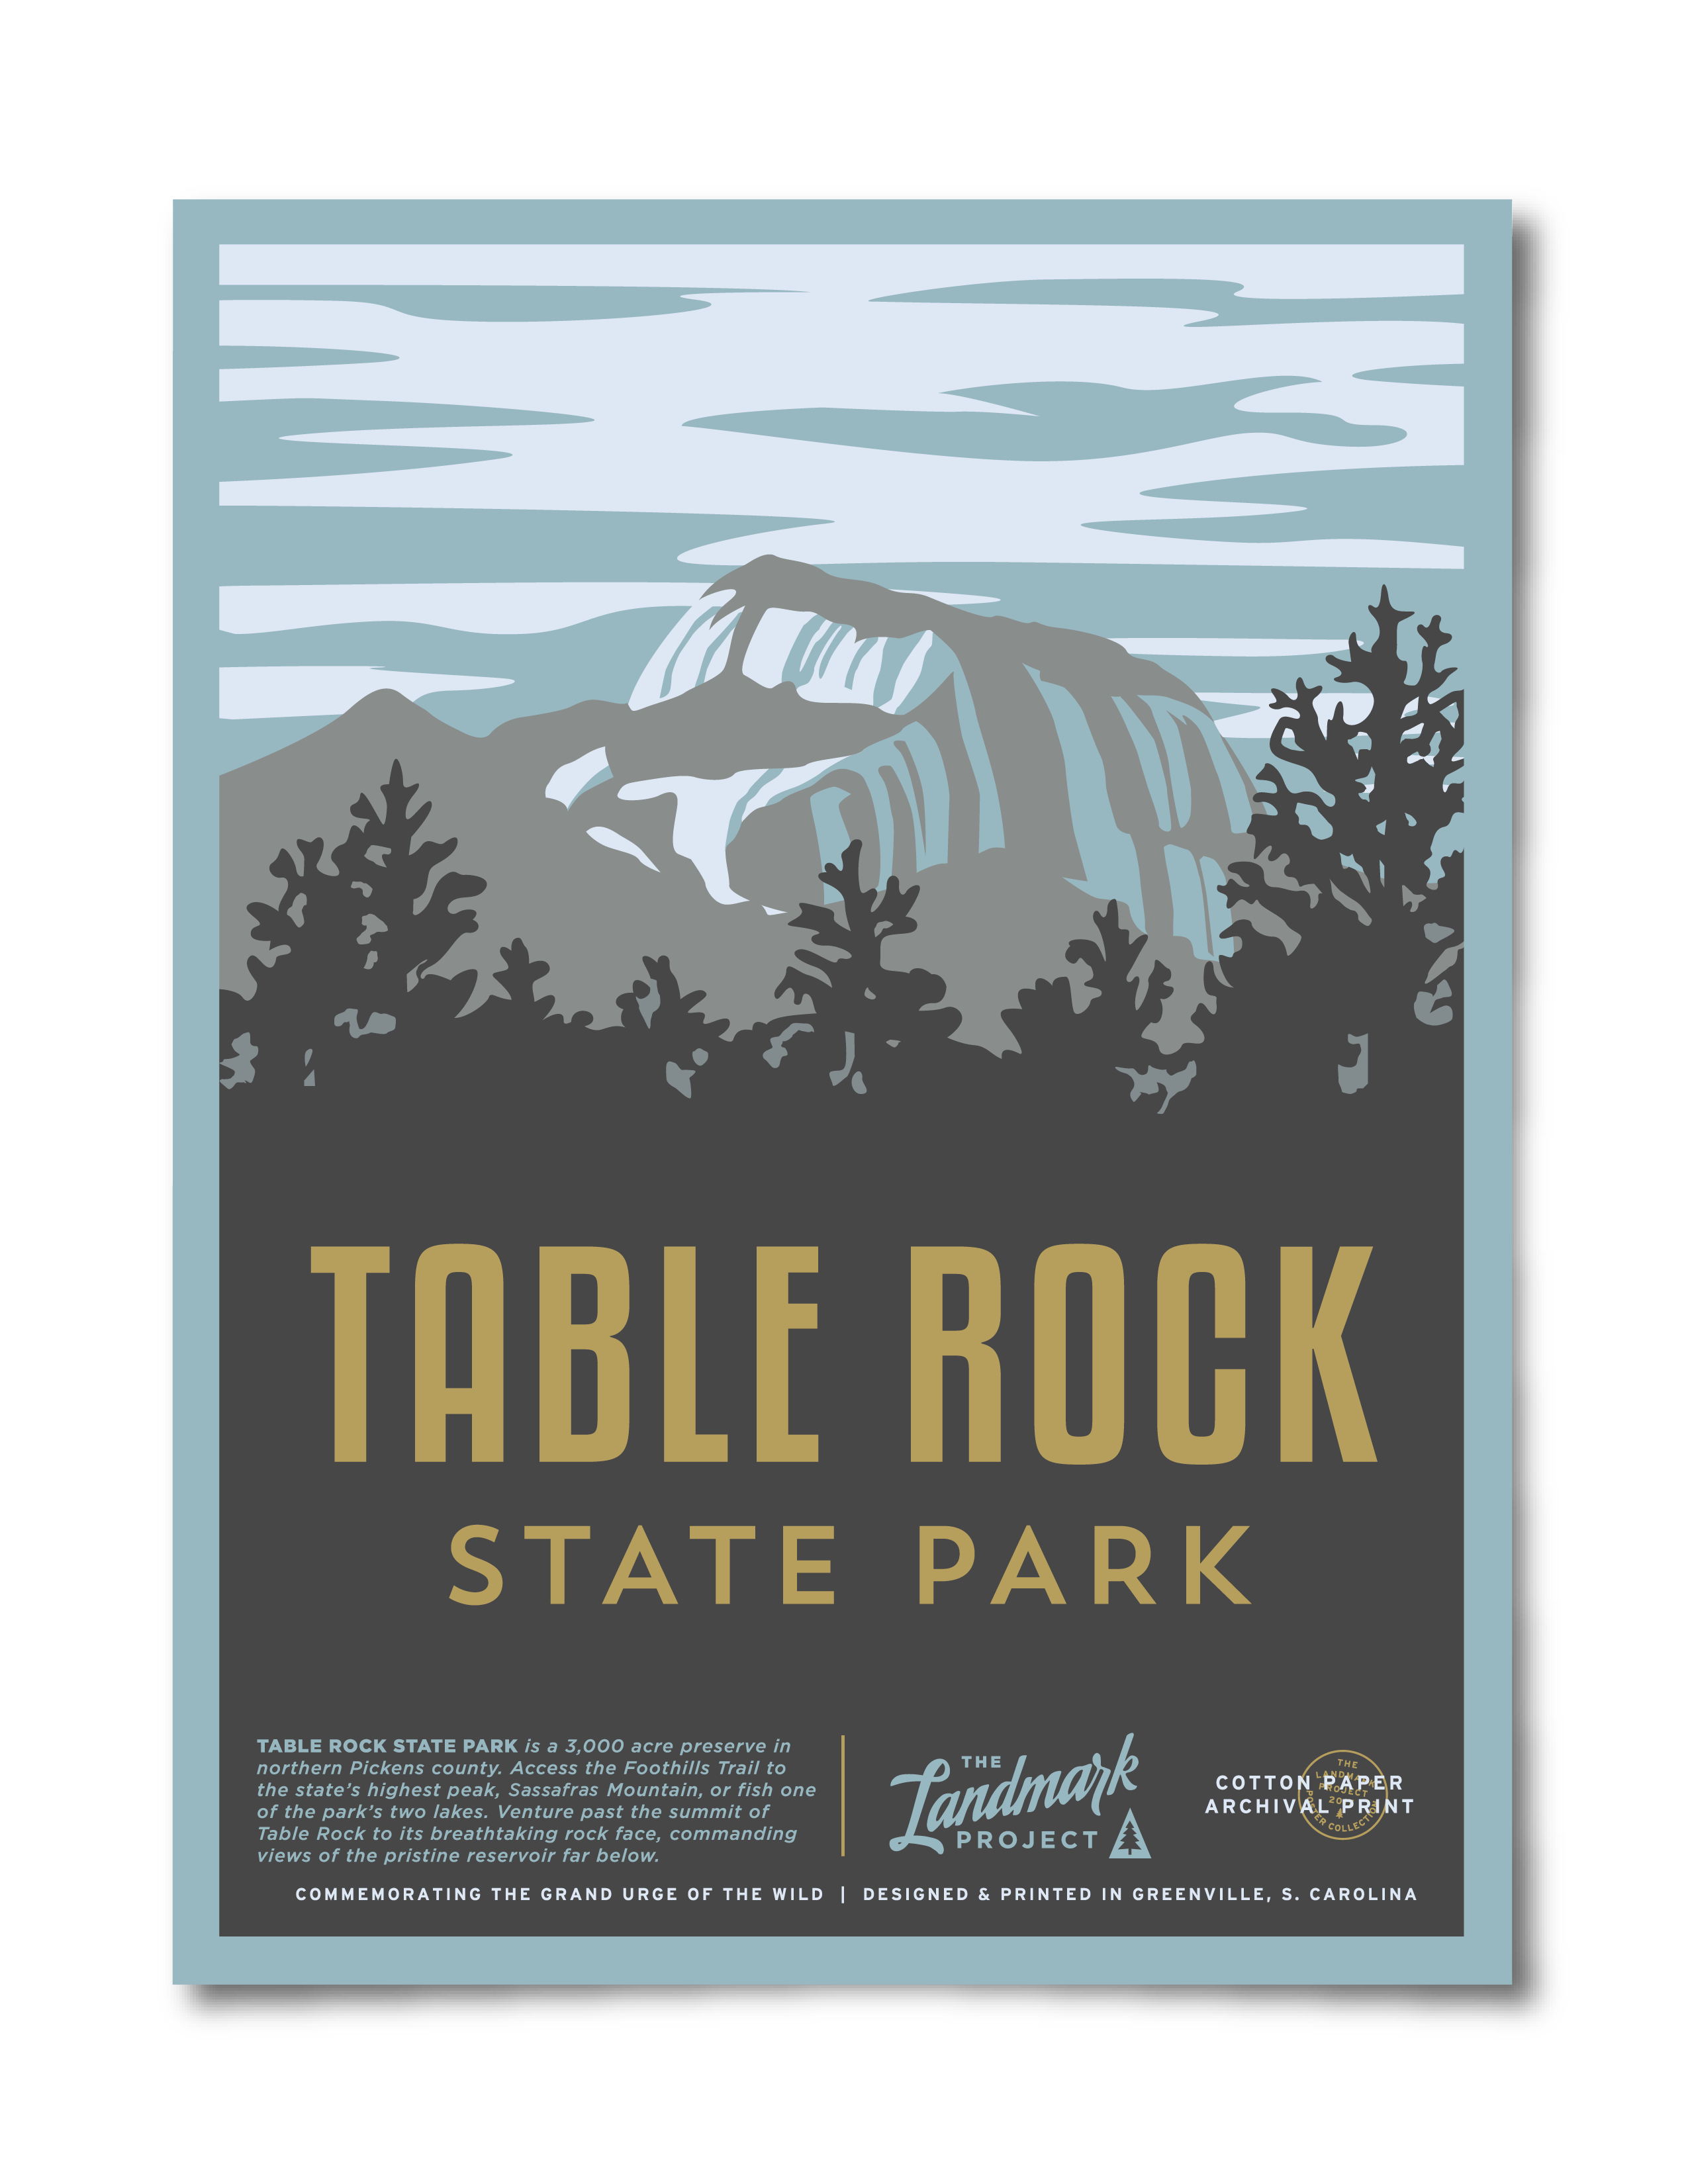 Table Rock State Park Poster – The Landmark Project